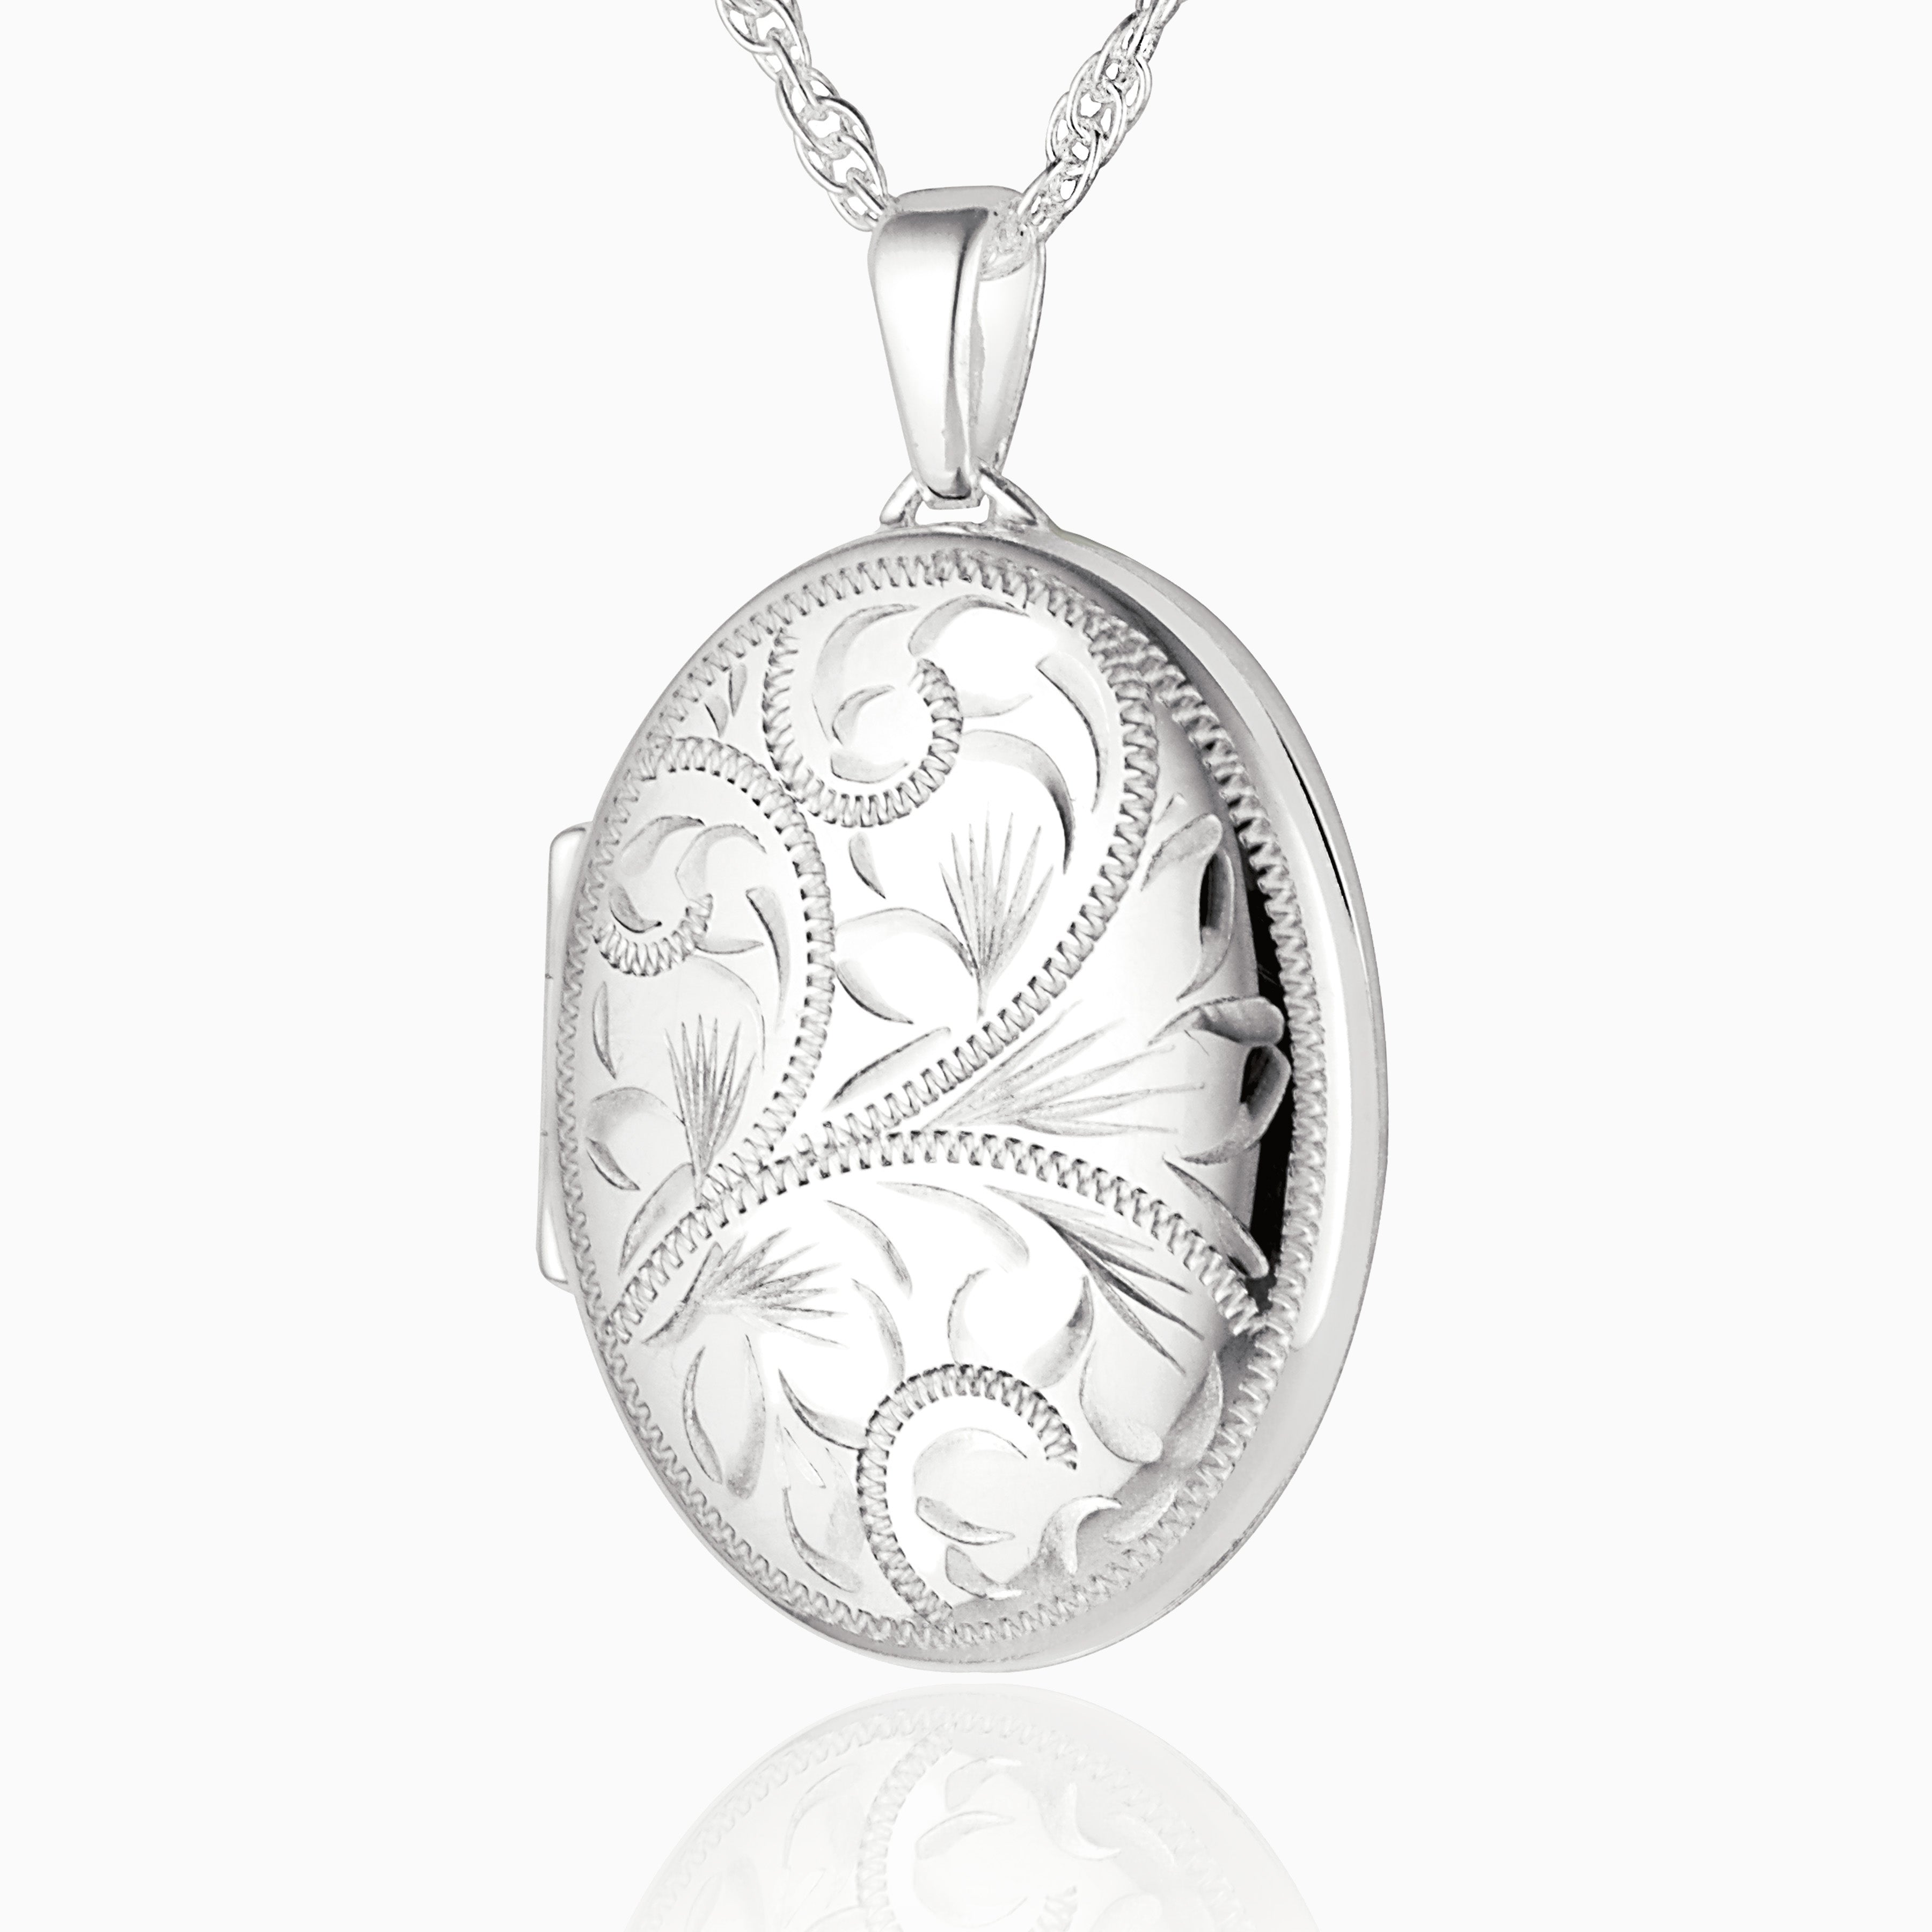 Product title: Victorian Oval Locket, product type: Necklaces